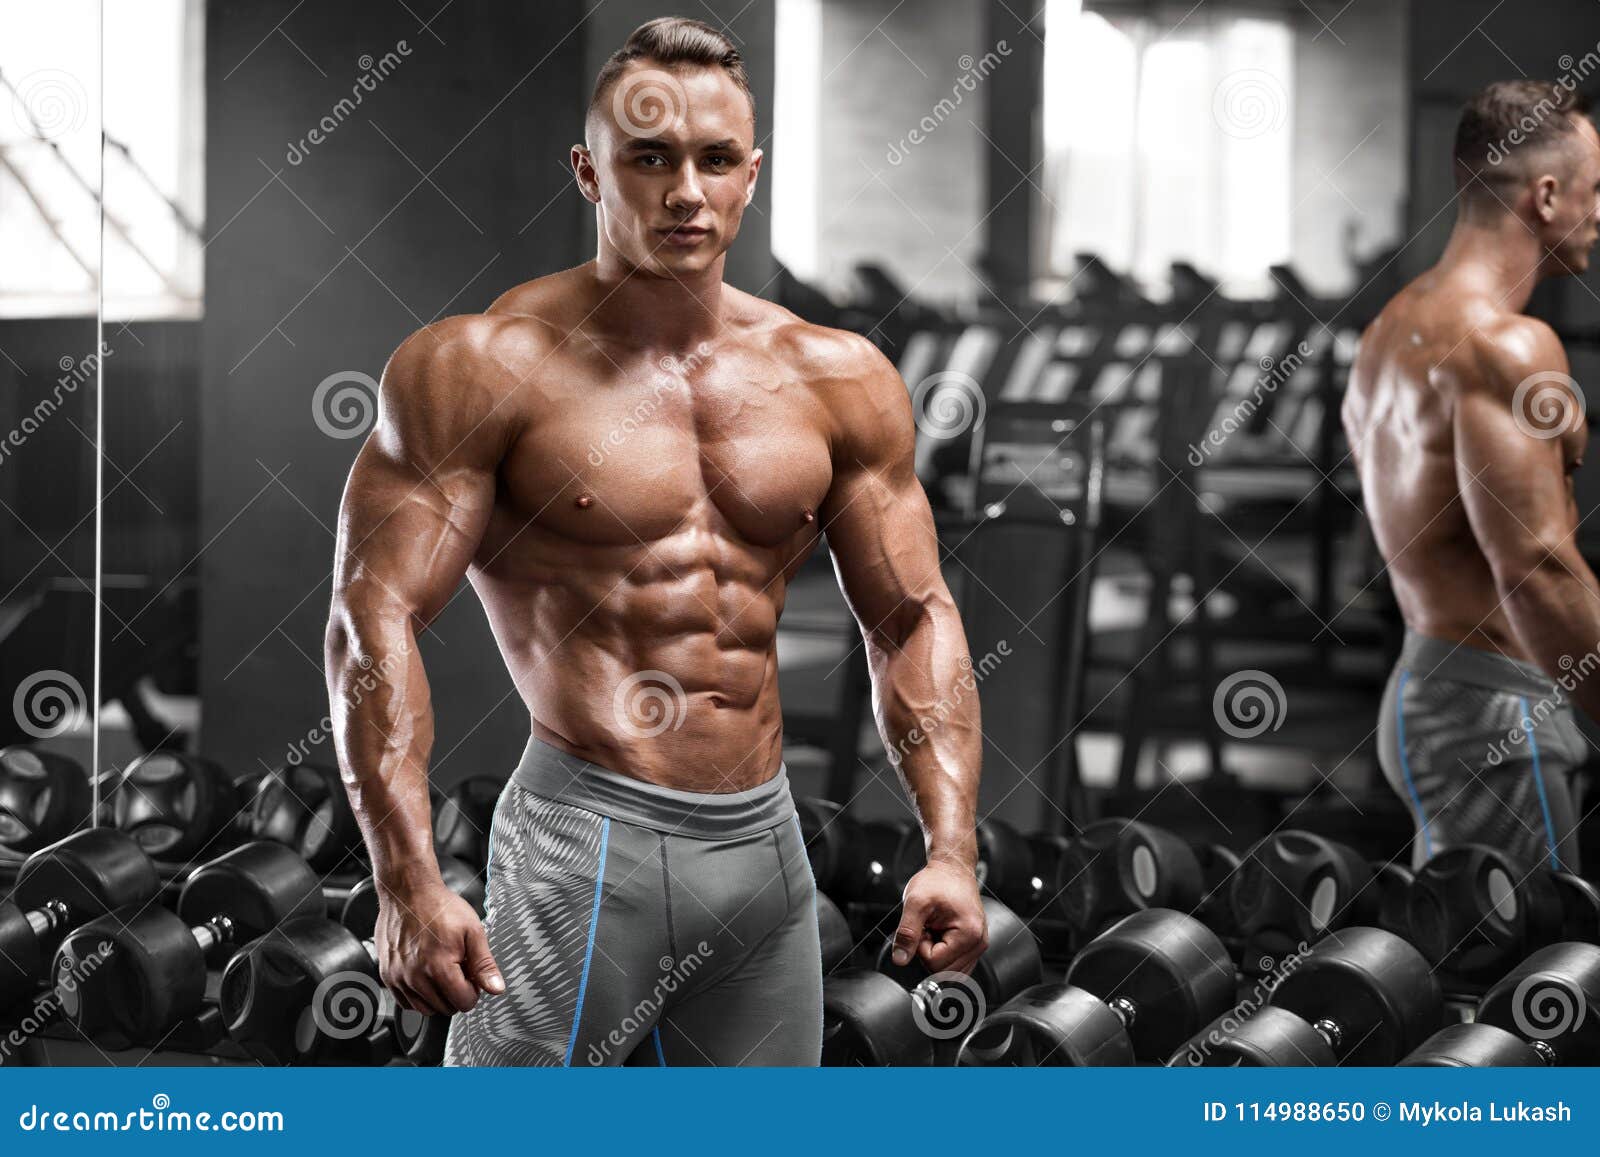 Muscular Man Fitness Model. Strong Male Naked Torso Abs 